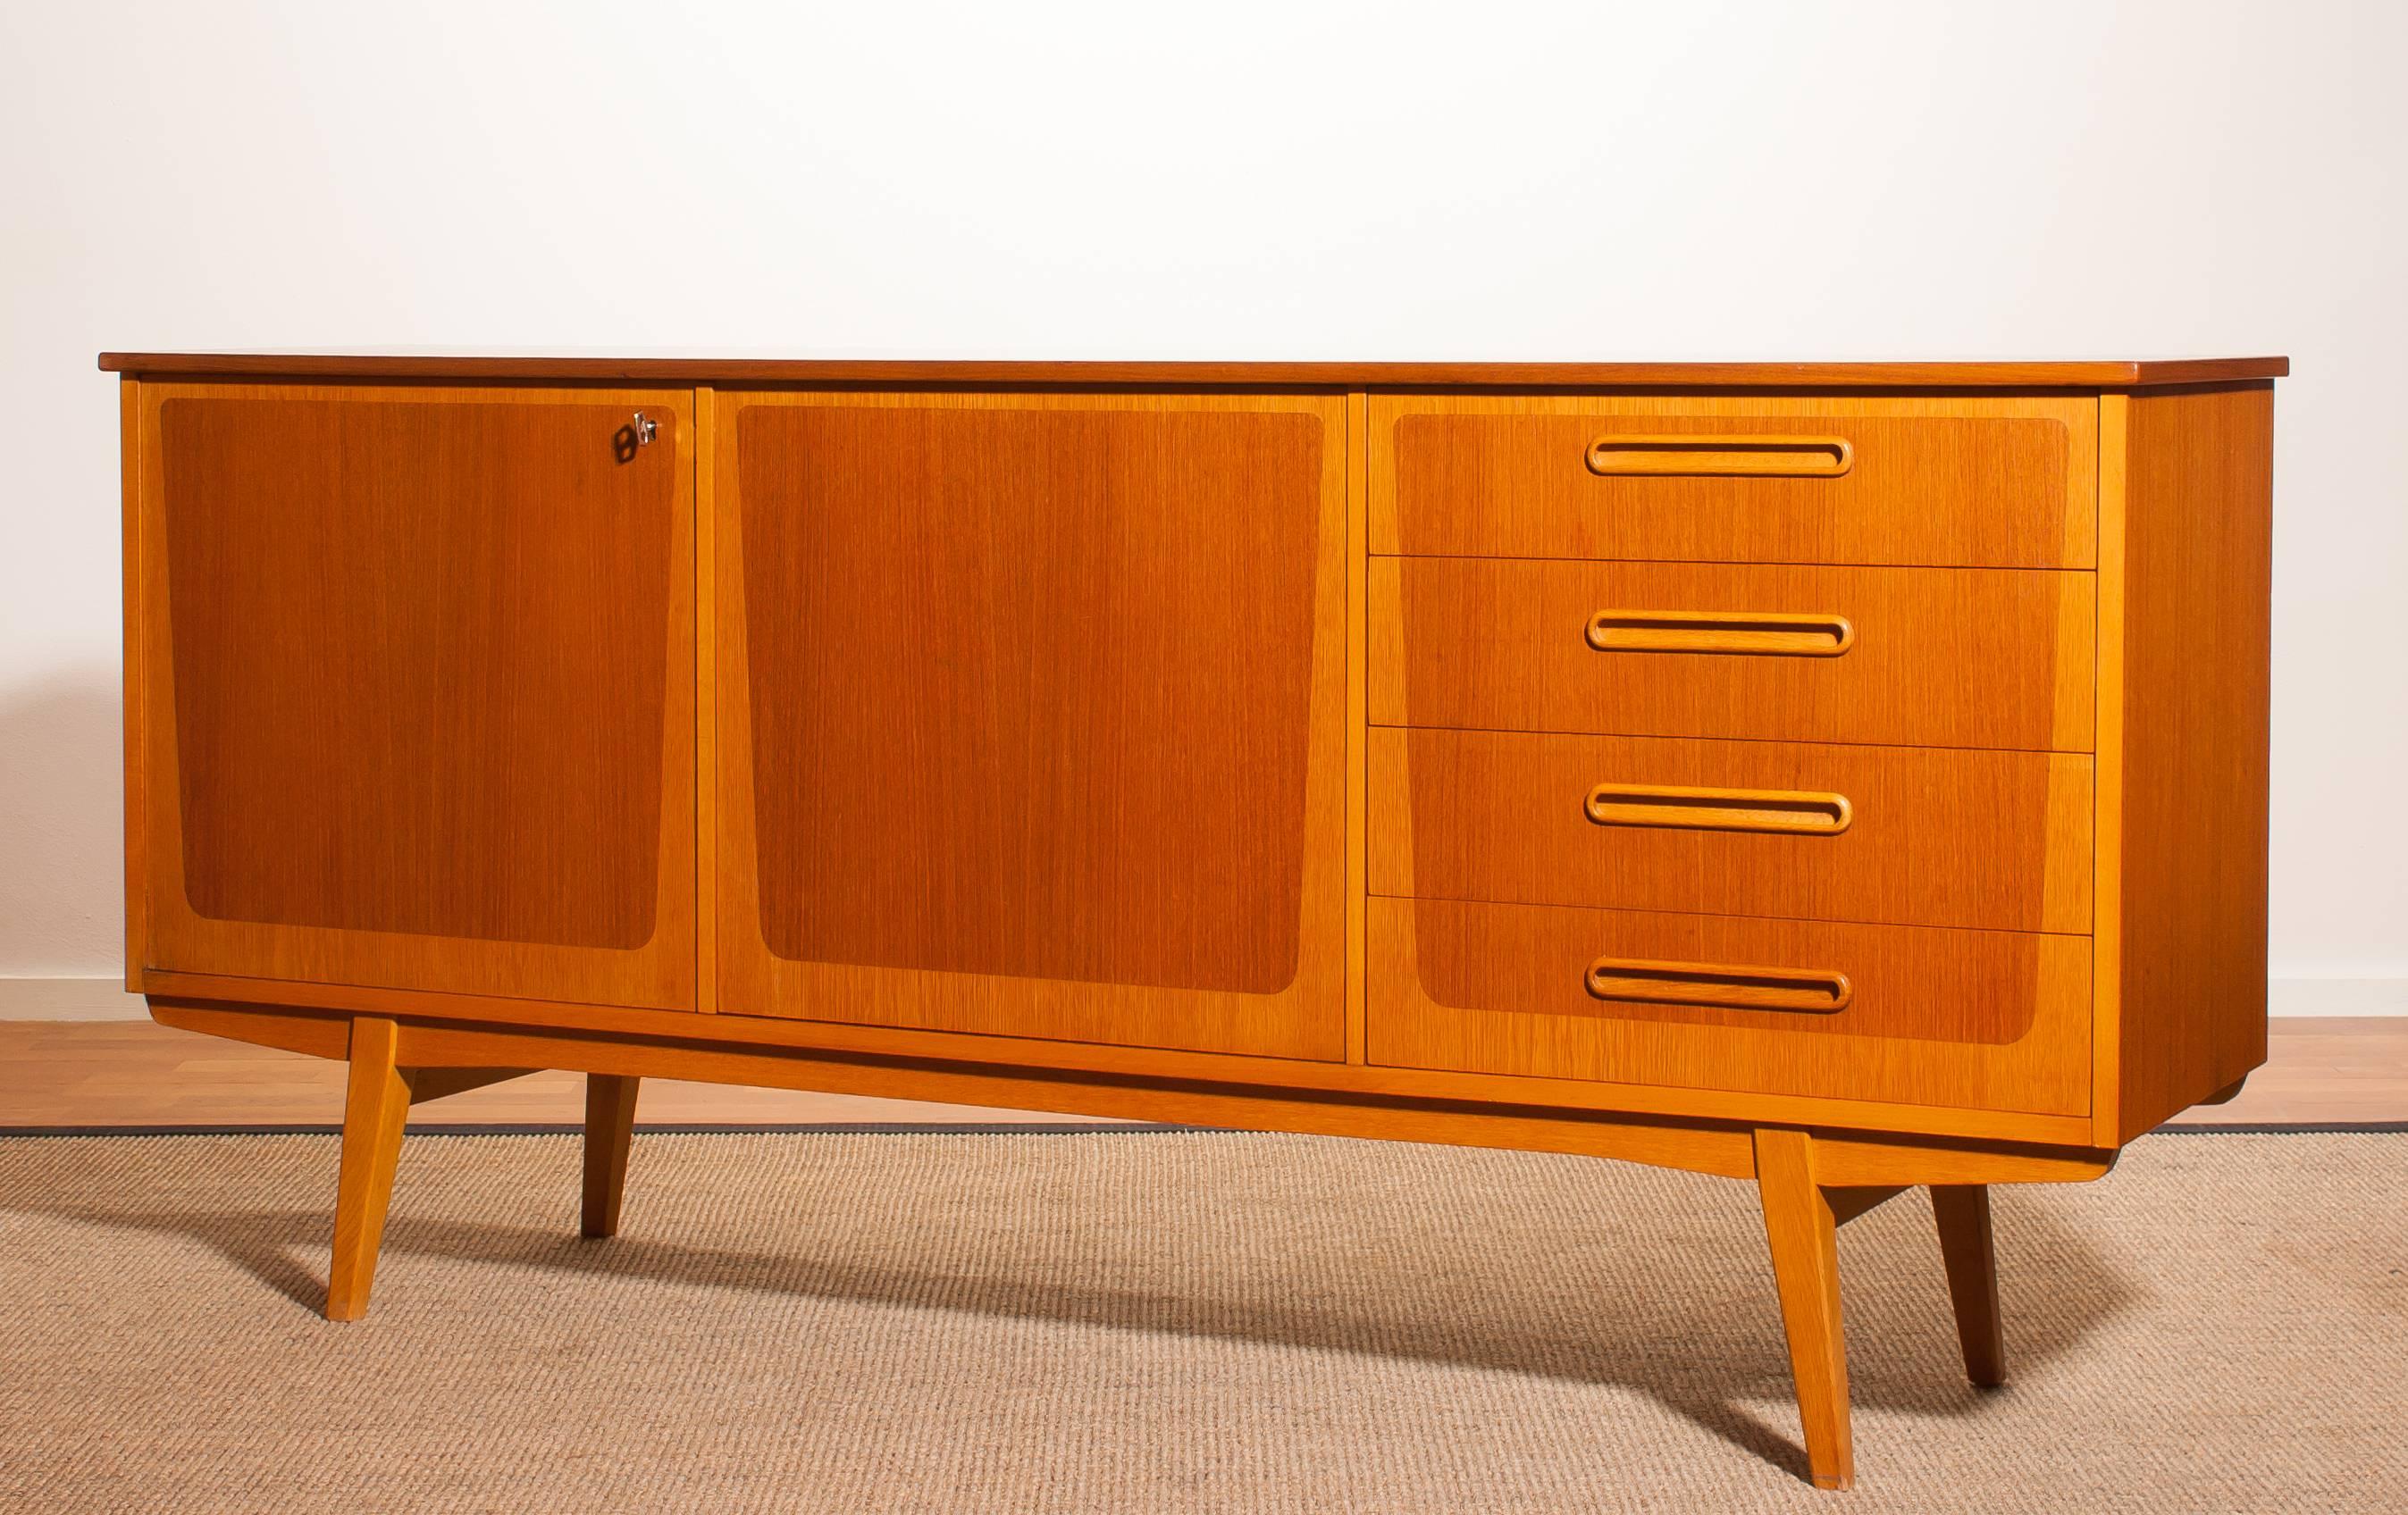 Beautiful sideboard from Sweden.
This cabinet is made of teak and oak.
It has two doors and four drawers.
It is in a very good condition.
Period 1960s
Dimensions: H 80 cm, W 172 cm, D 43 cm.